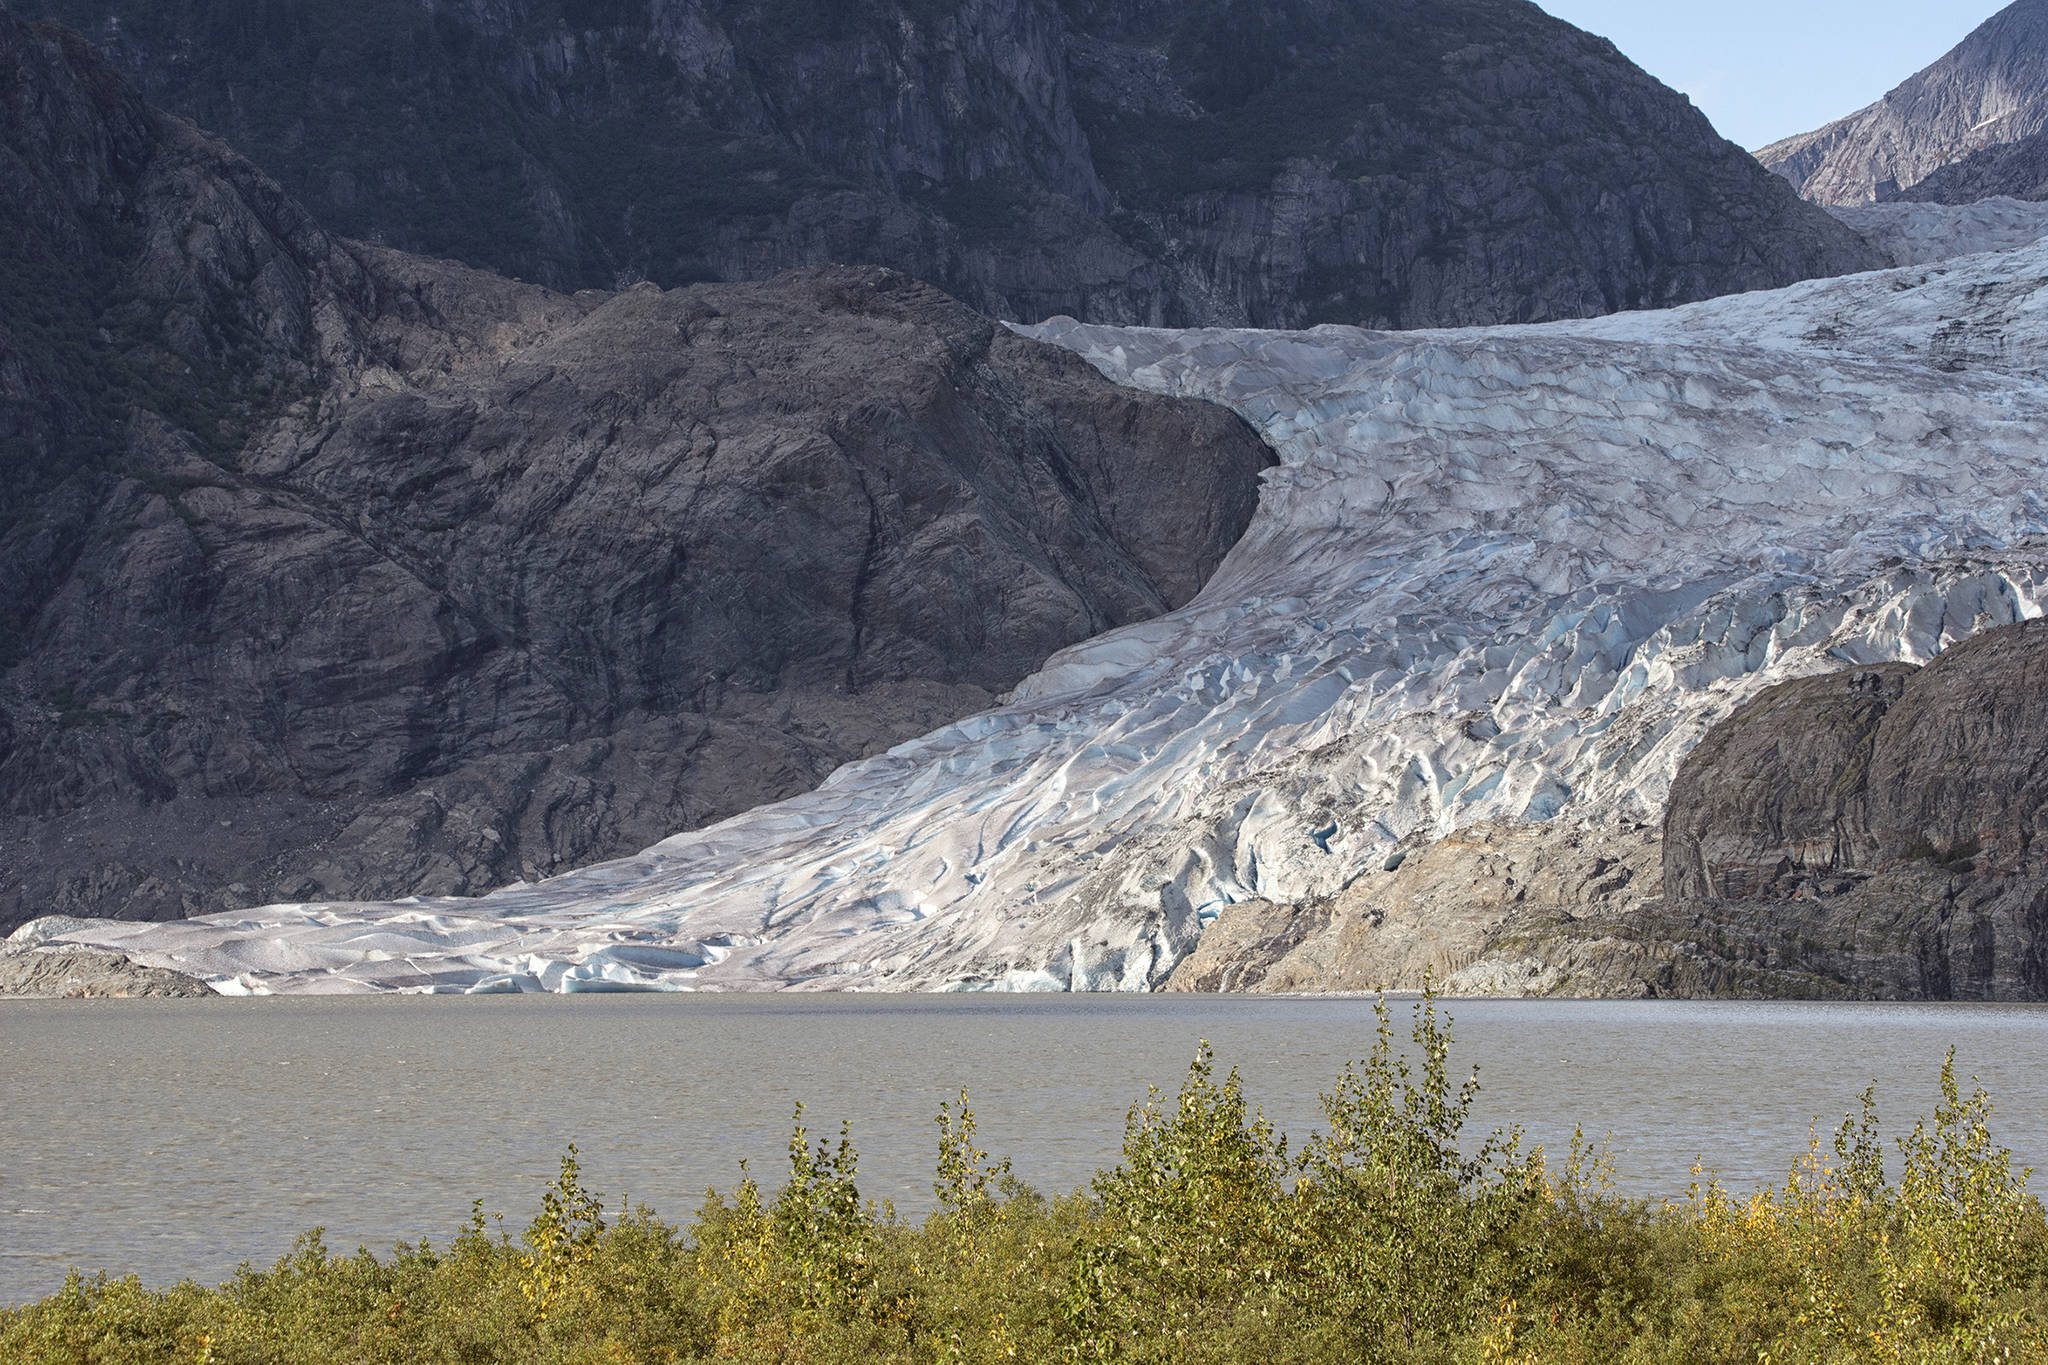 The new face of the Mendenhall Glacier 2020 is seen on Sept. 10. (Courtesy Photo / Kenneth Gill, gillfoto)